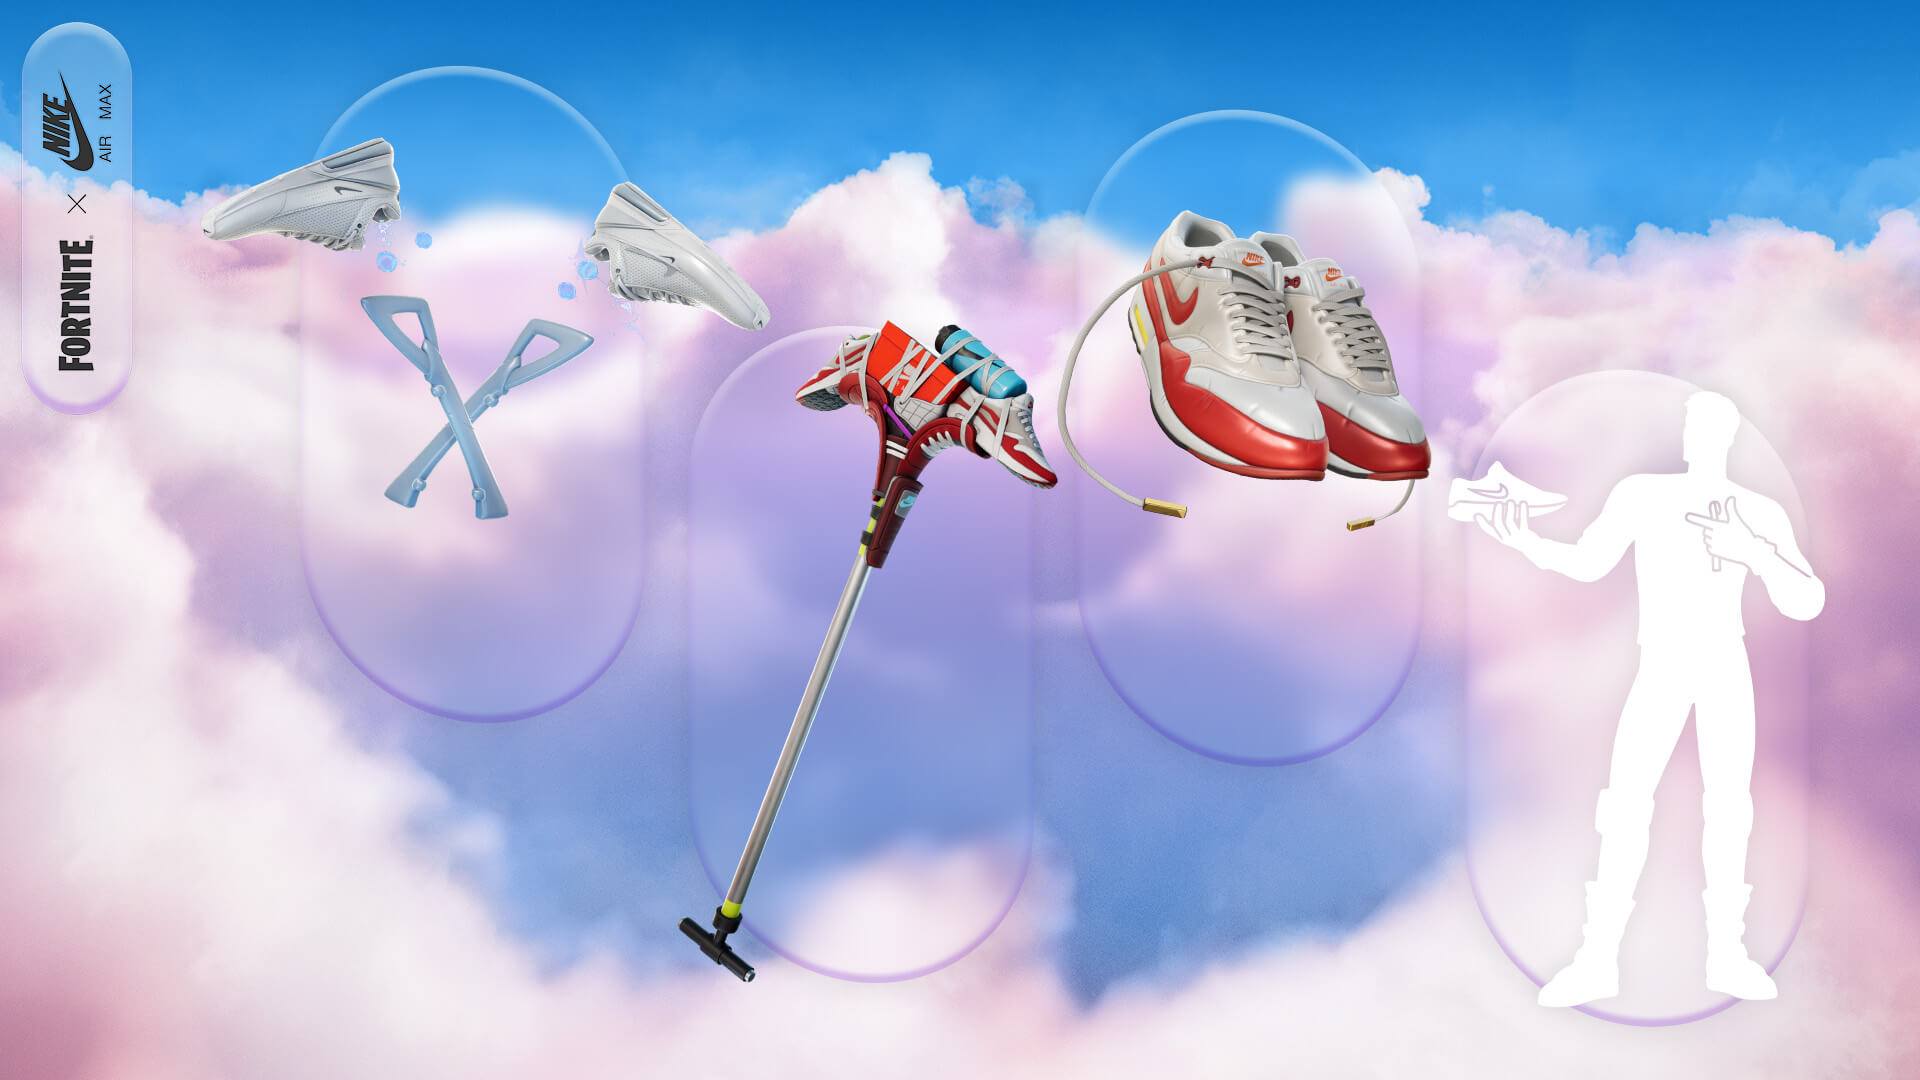 Fortnite x Nike Air Max: New Cosmetics Available Now